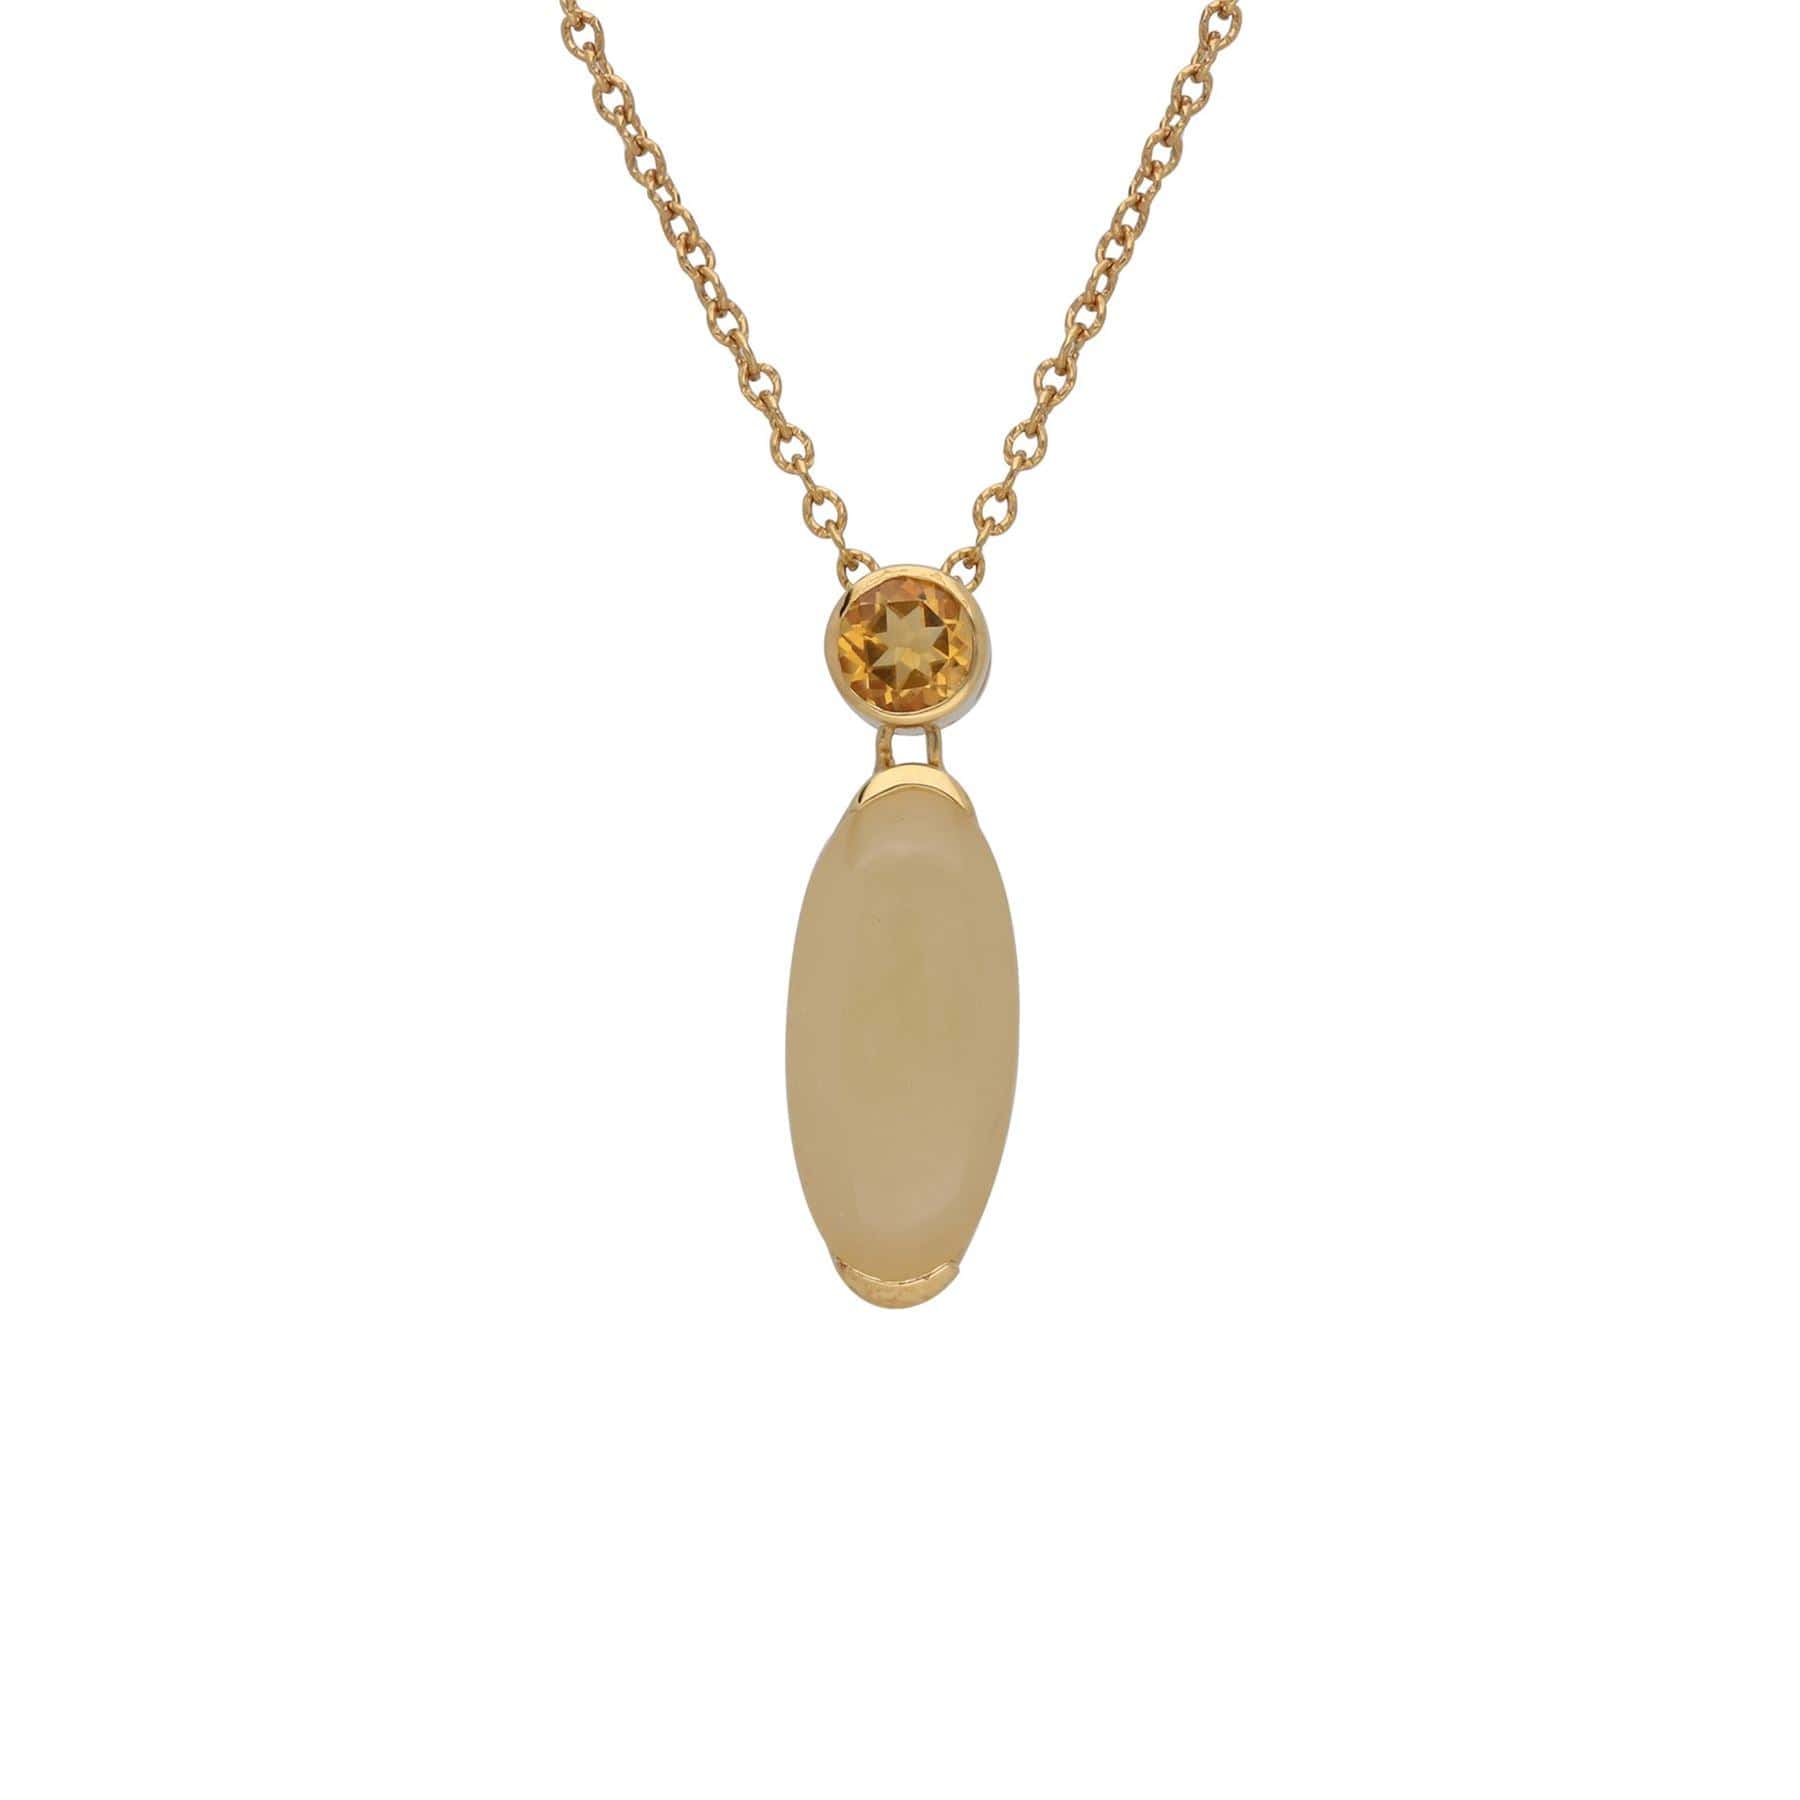 Kosmos Oval Citrine & Opal Necklace in Gold Plated Sterling Silver - Gemondo